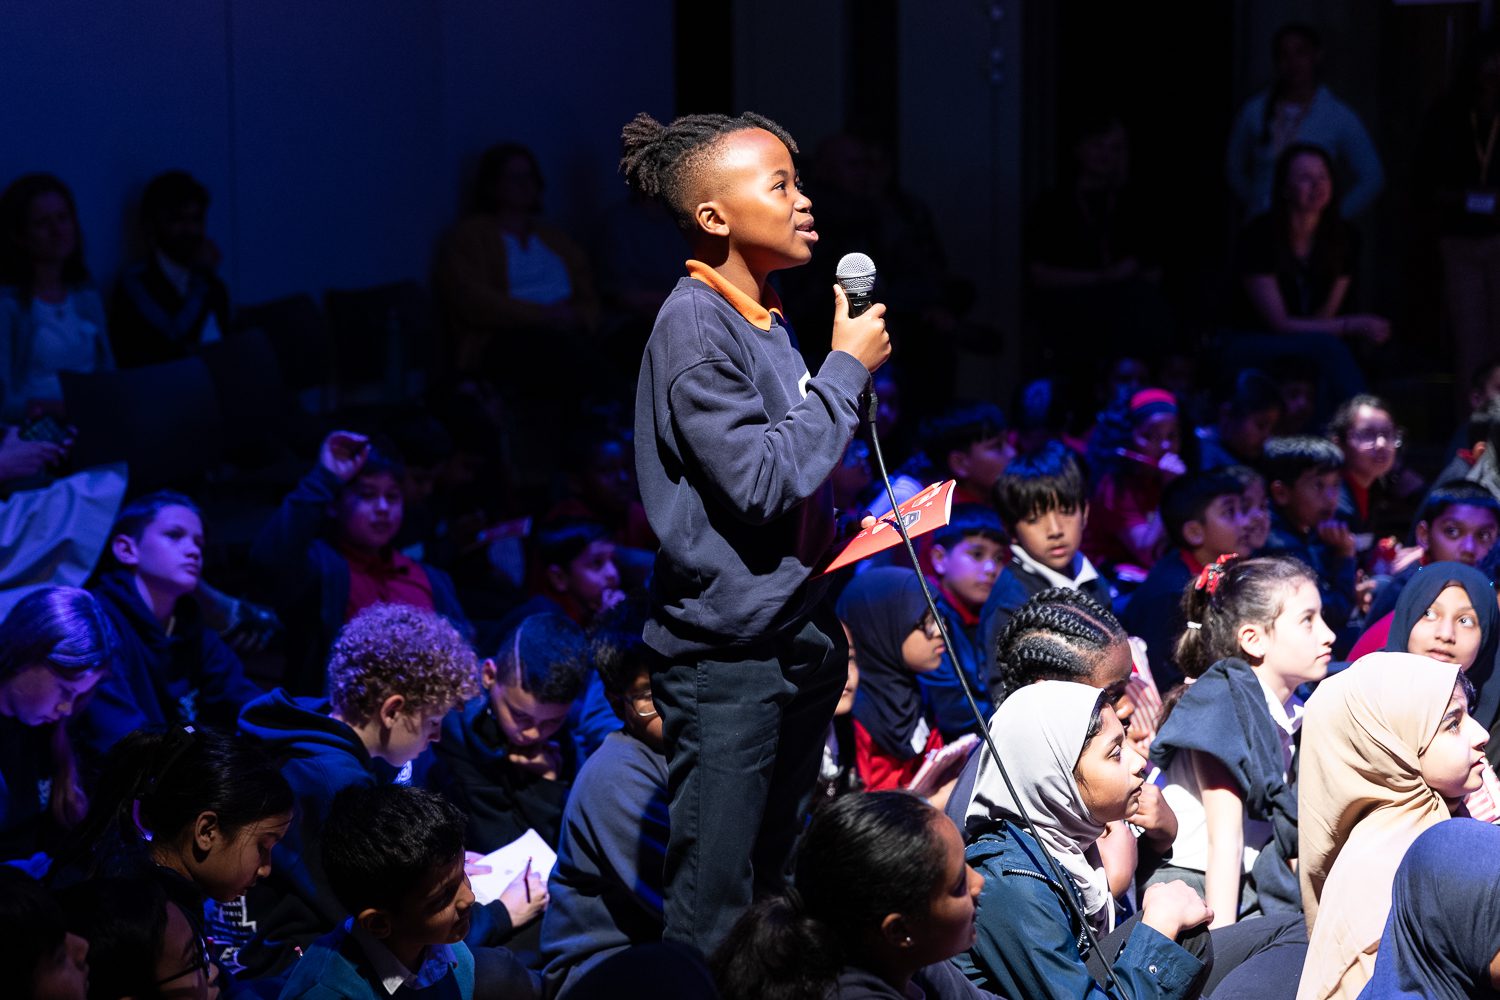 A young black boy stands proudly holding a microphone, addressing someone off camera. He is surrounded by other young children, sitting on the floor of a hall, who are looking up at him.